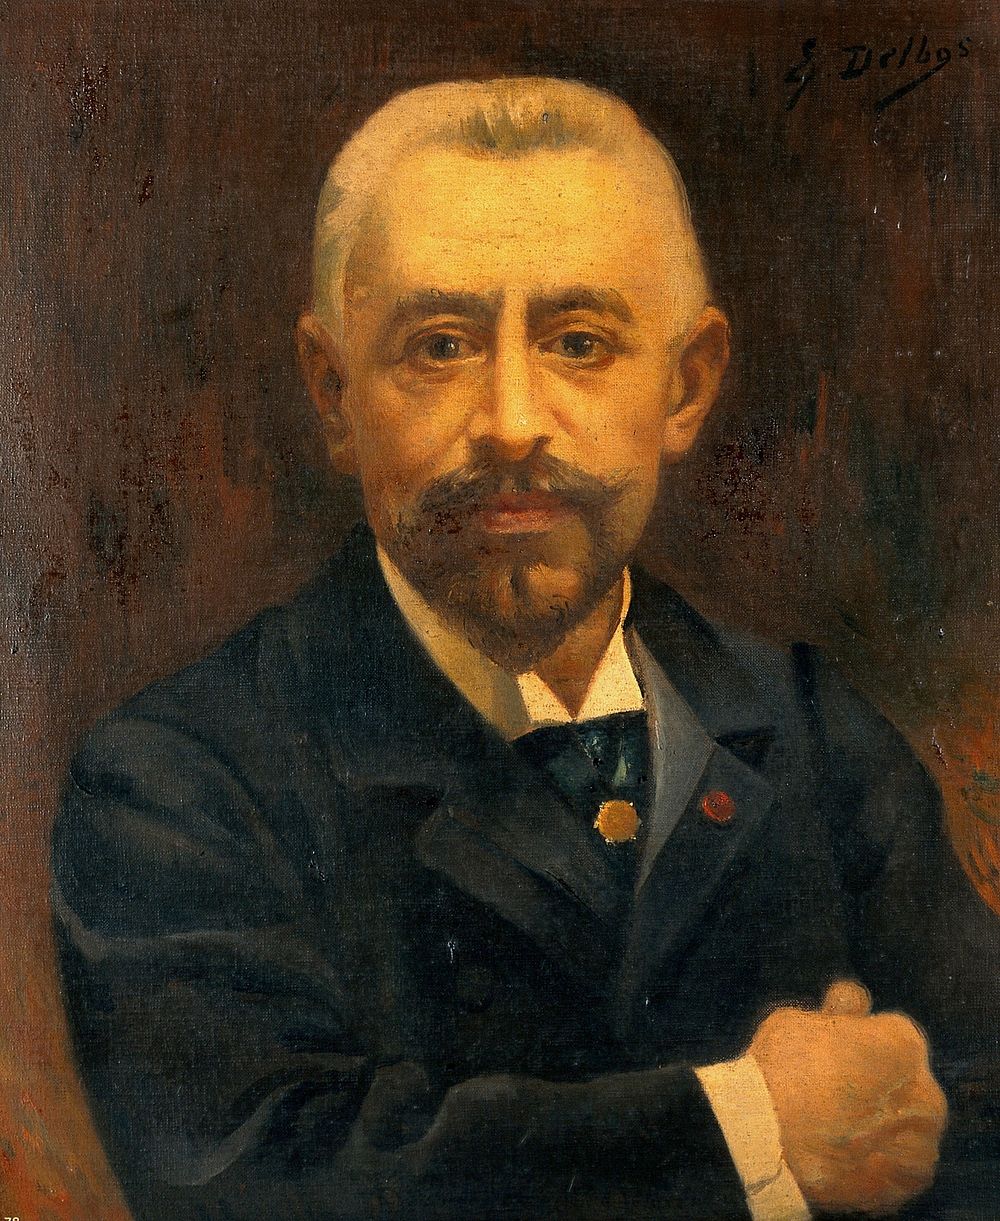 Edmond Isidore Etienne Nocard, microbiologist. Oil painting by E. Delbos.